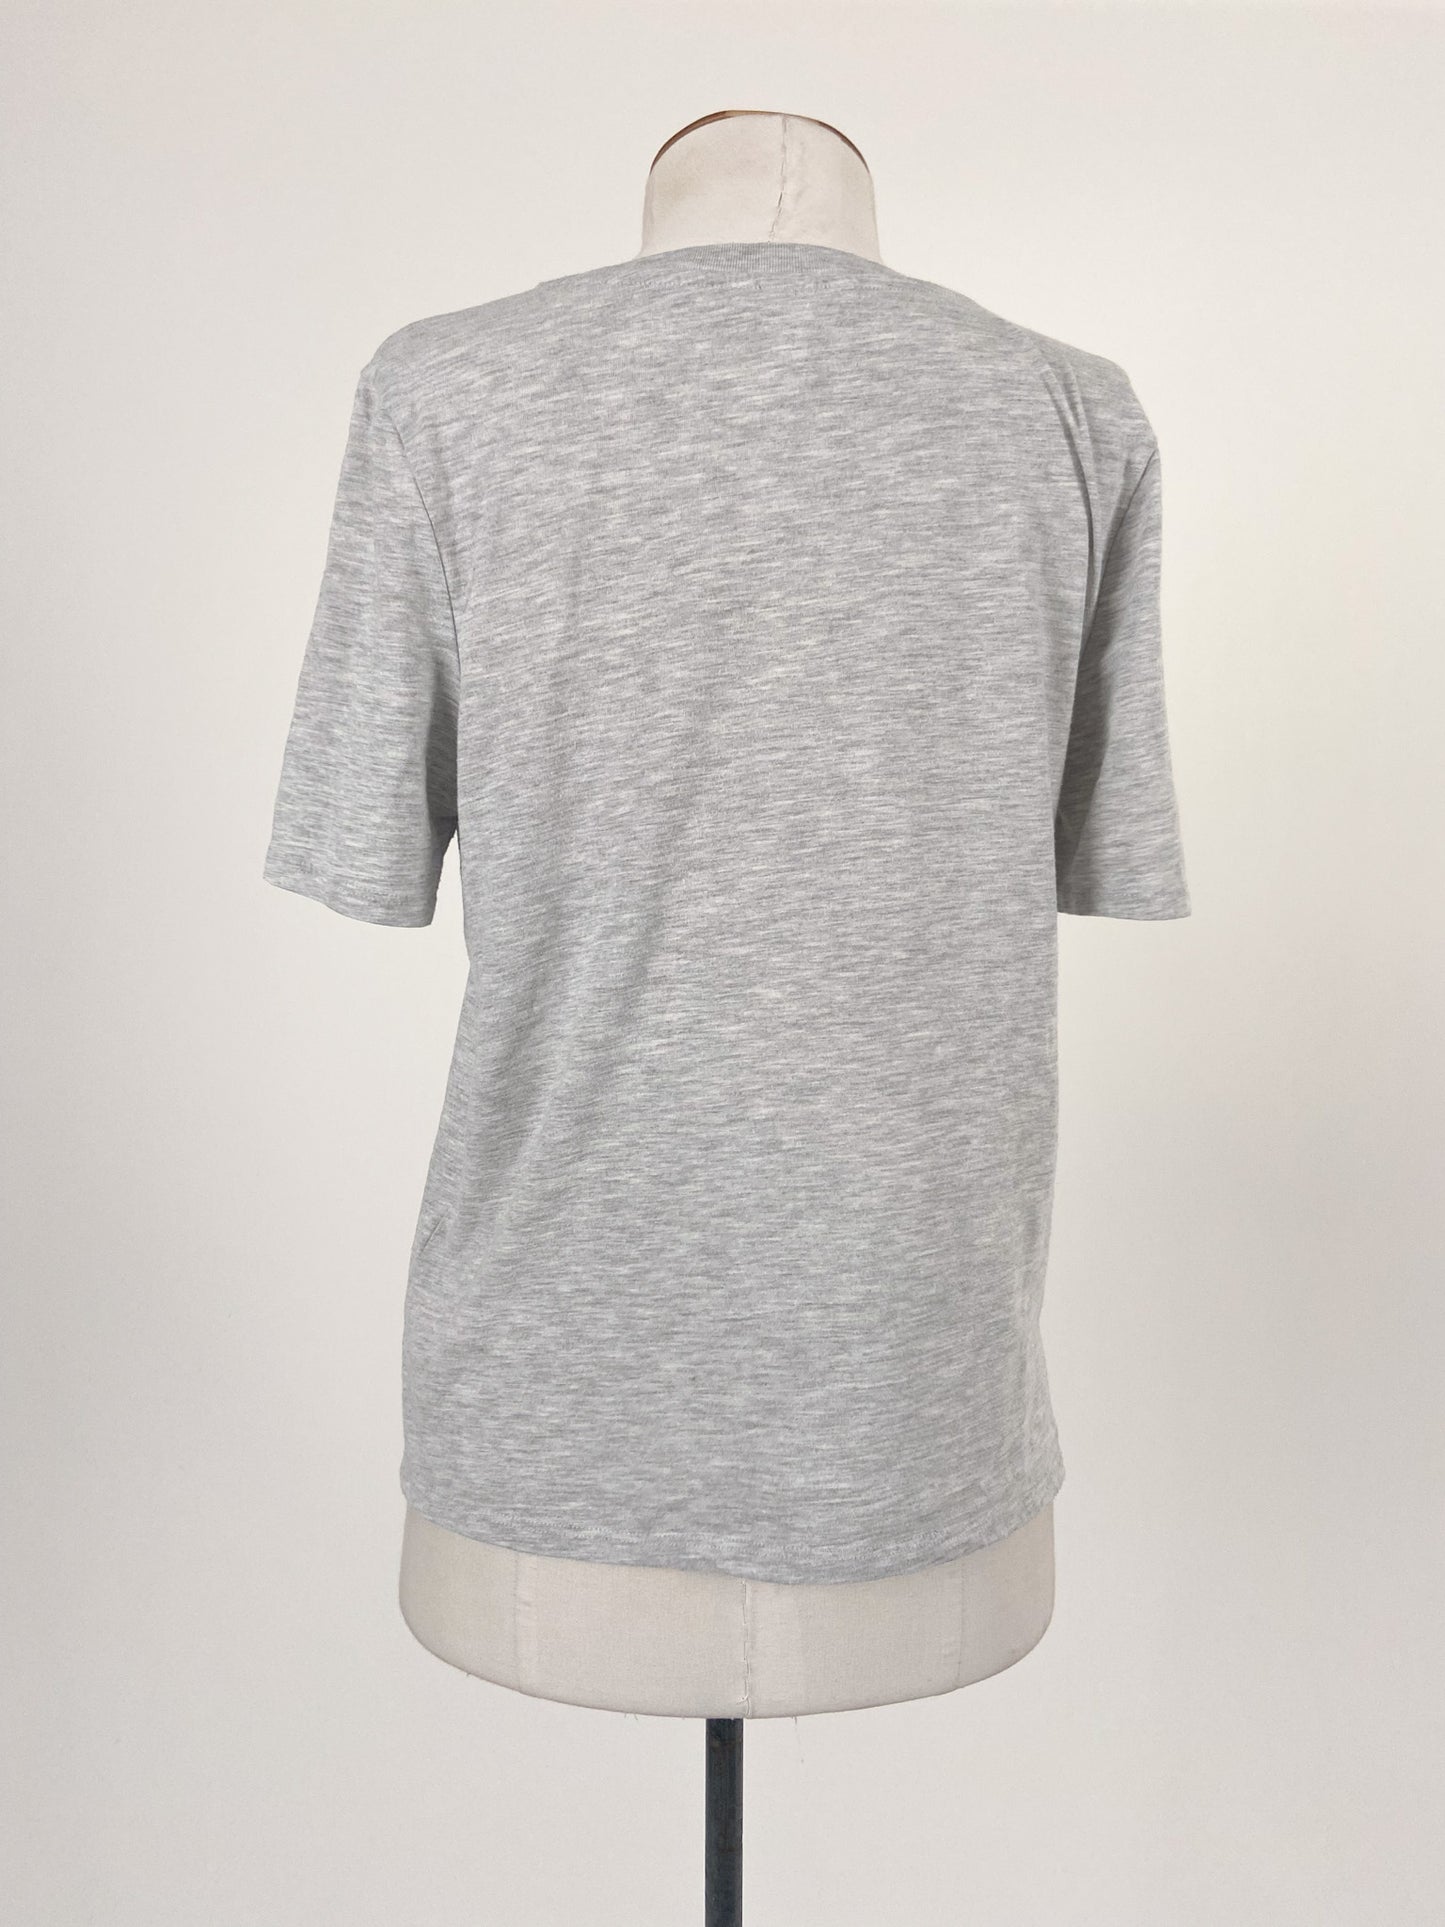 H&M | Grey Casual Top | Size XS